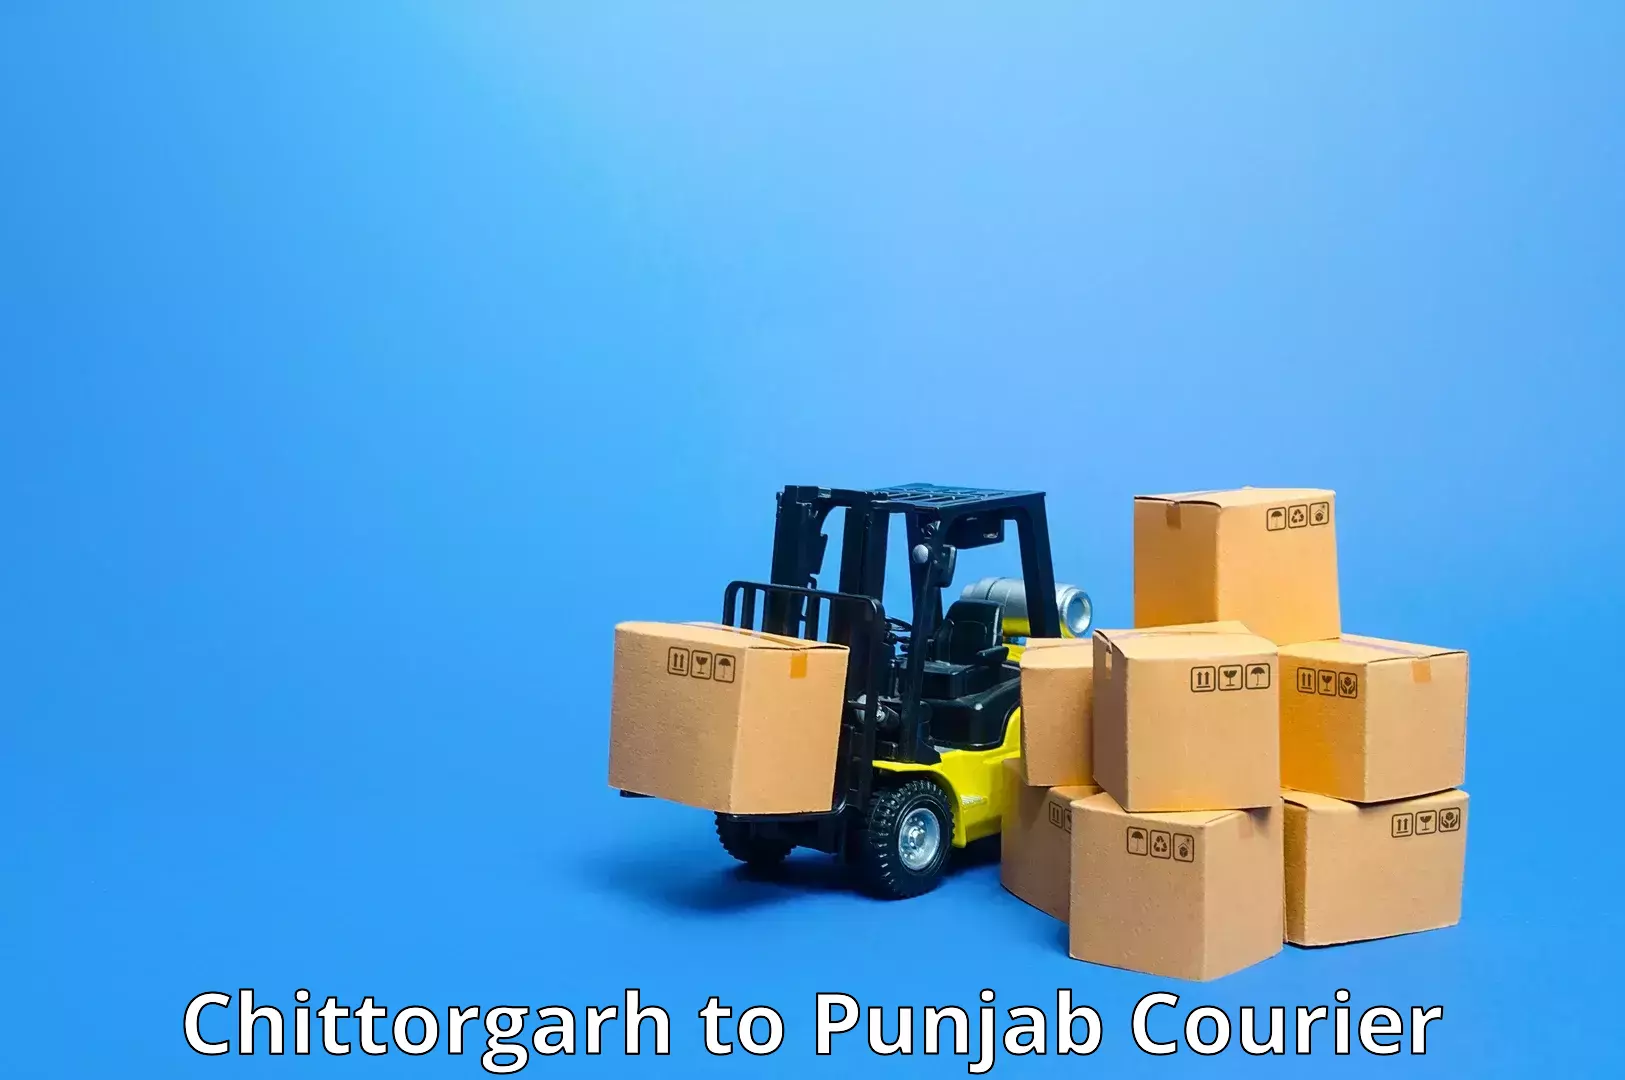 Global parcel delivery Chittorgarh to Mohali